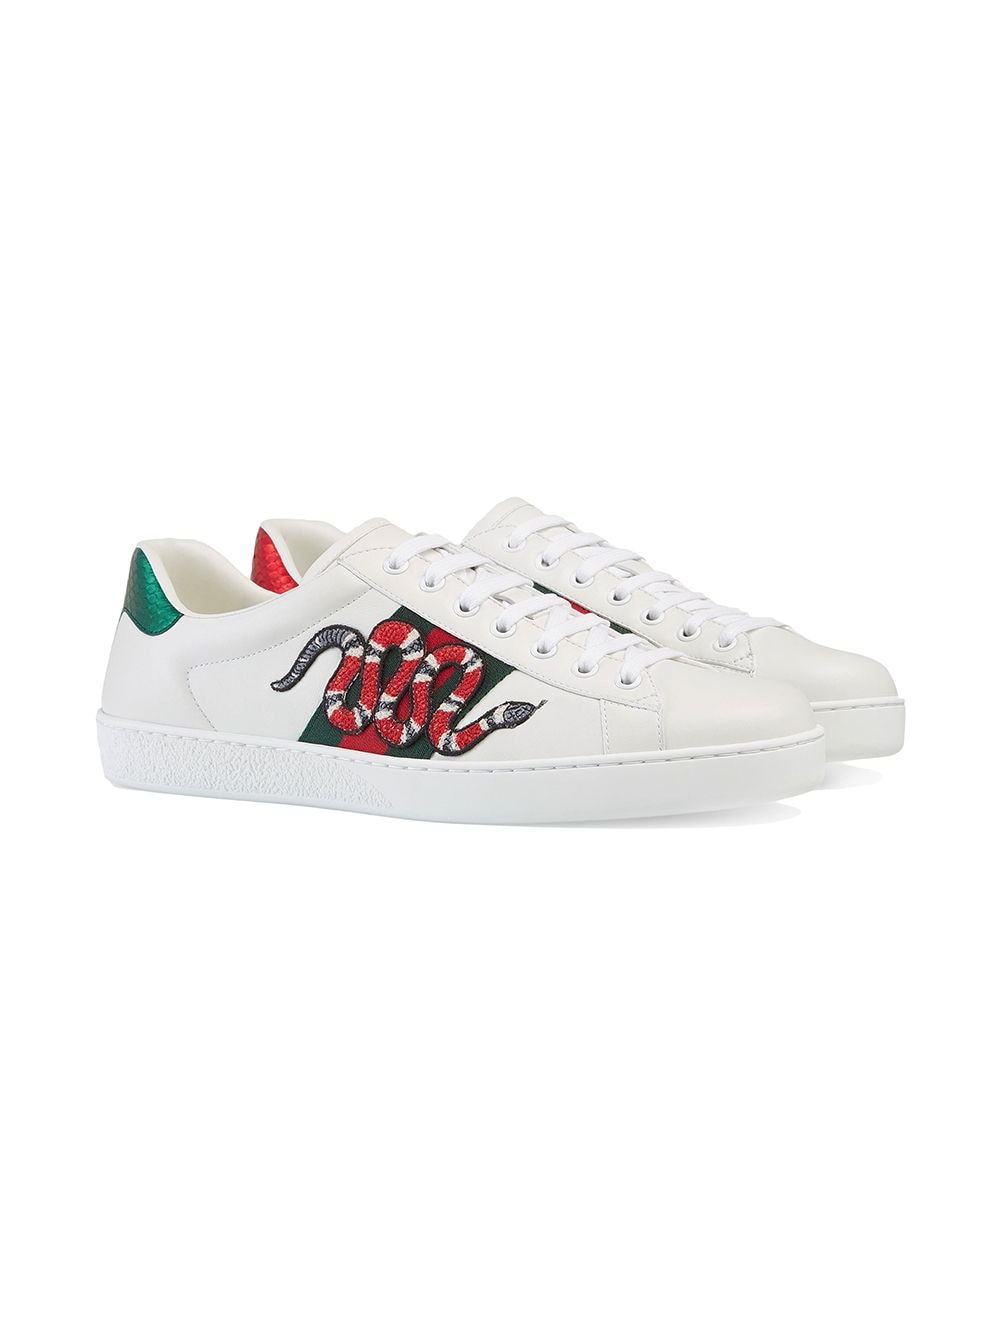 white snake gucci shoes